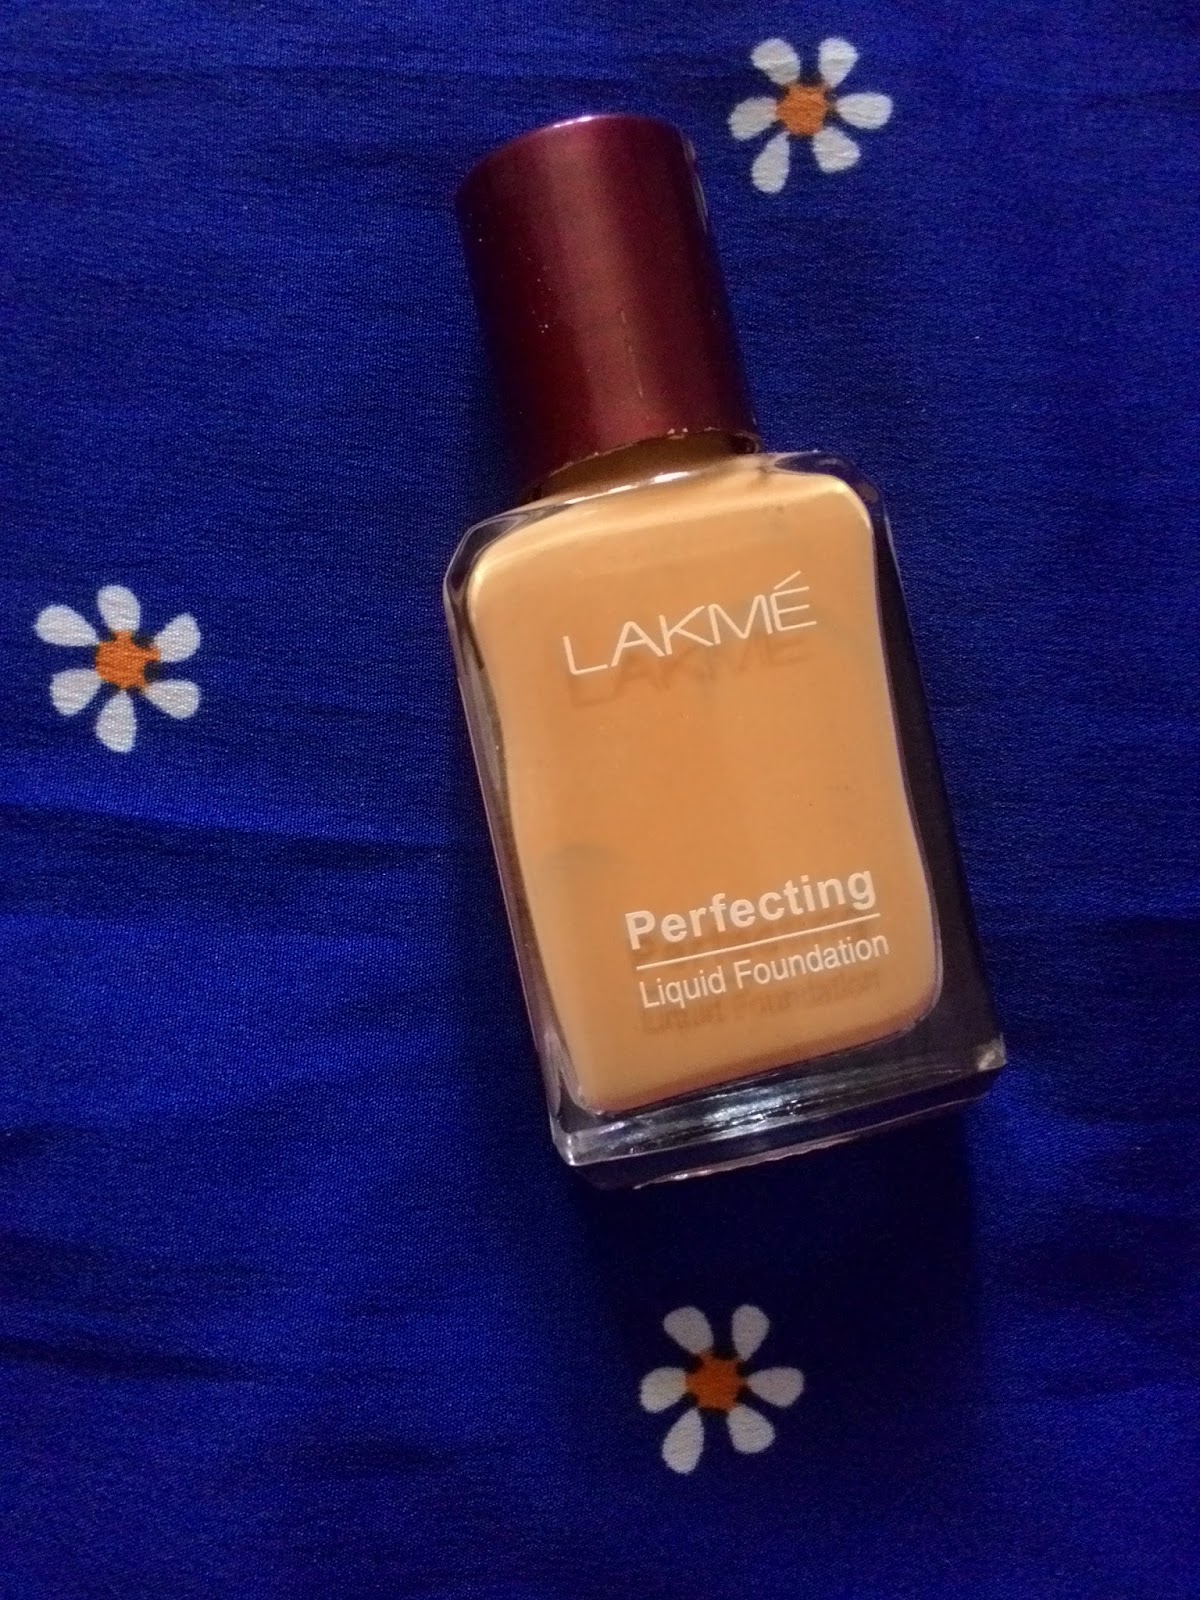 Lakme Perfecting Liquid Foundation (Natural Shell) - Review